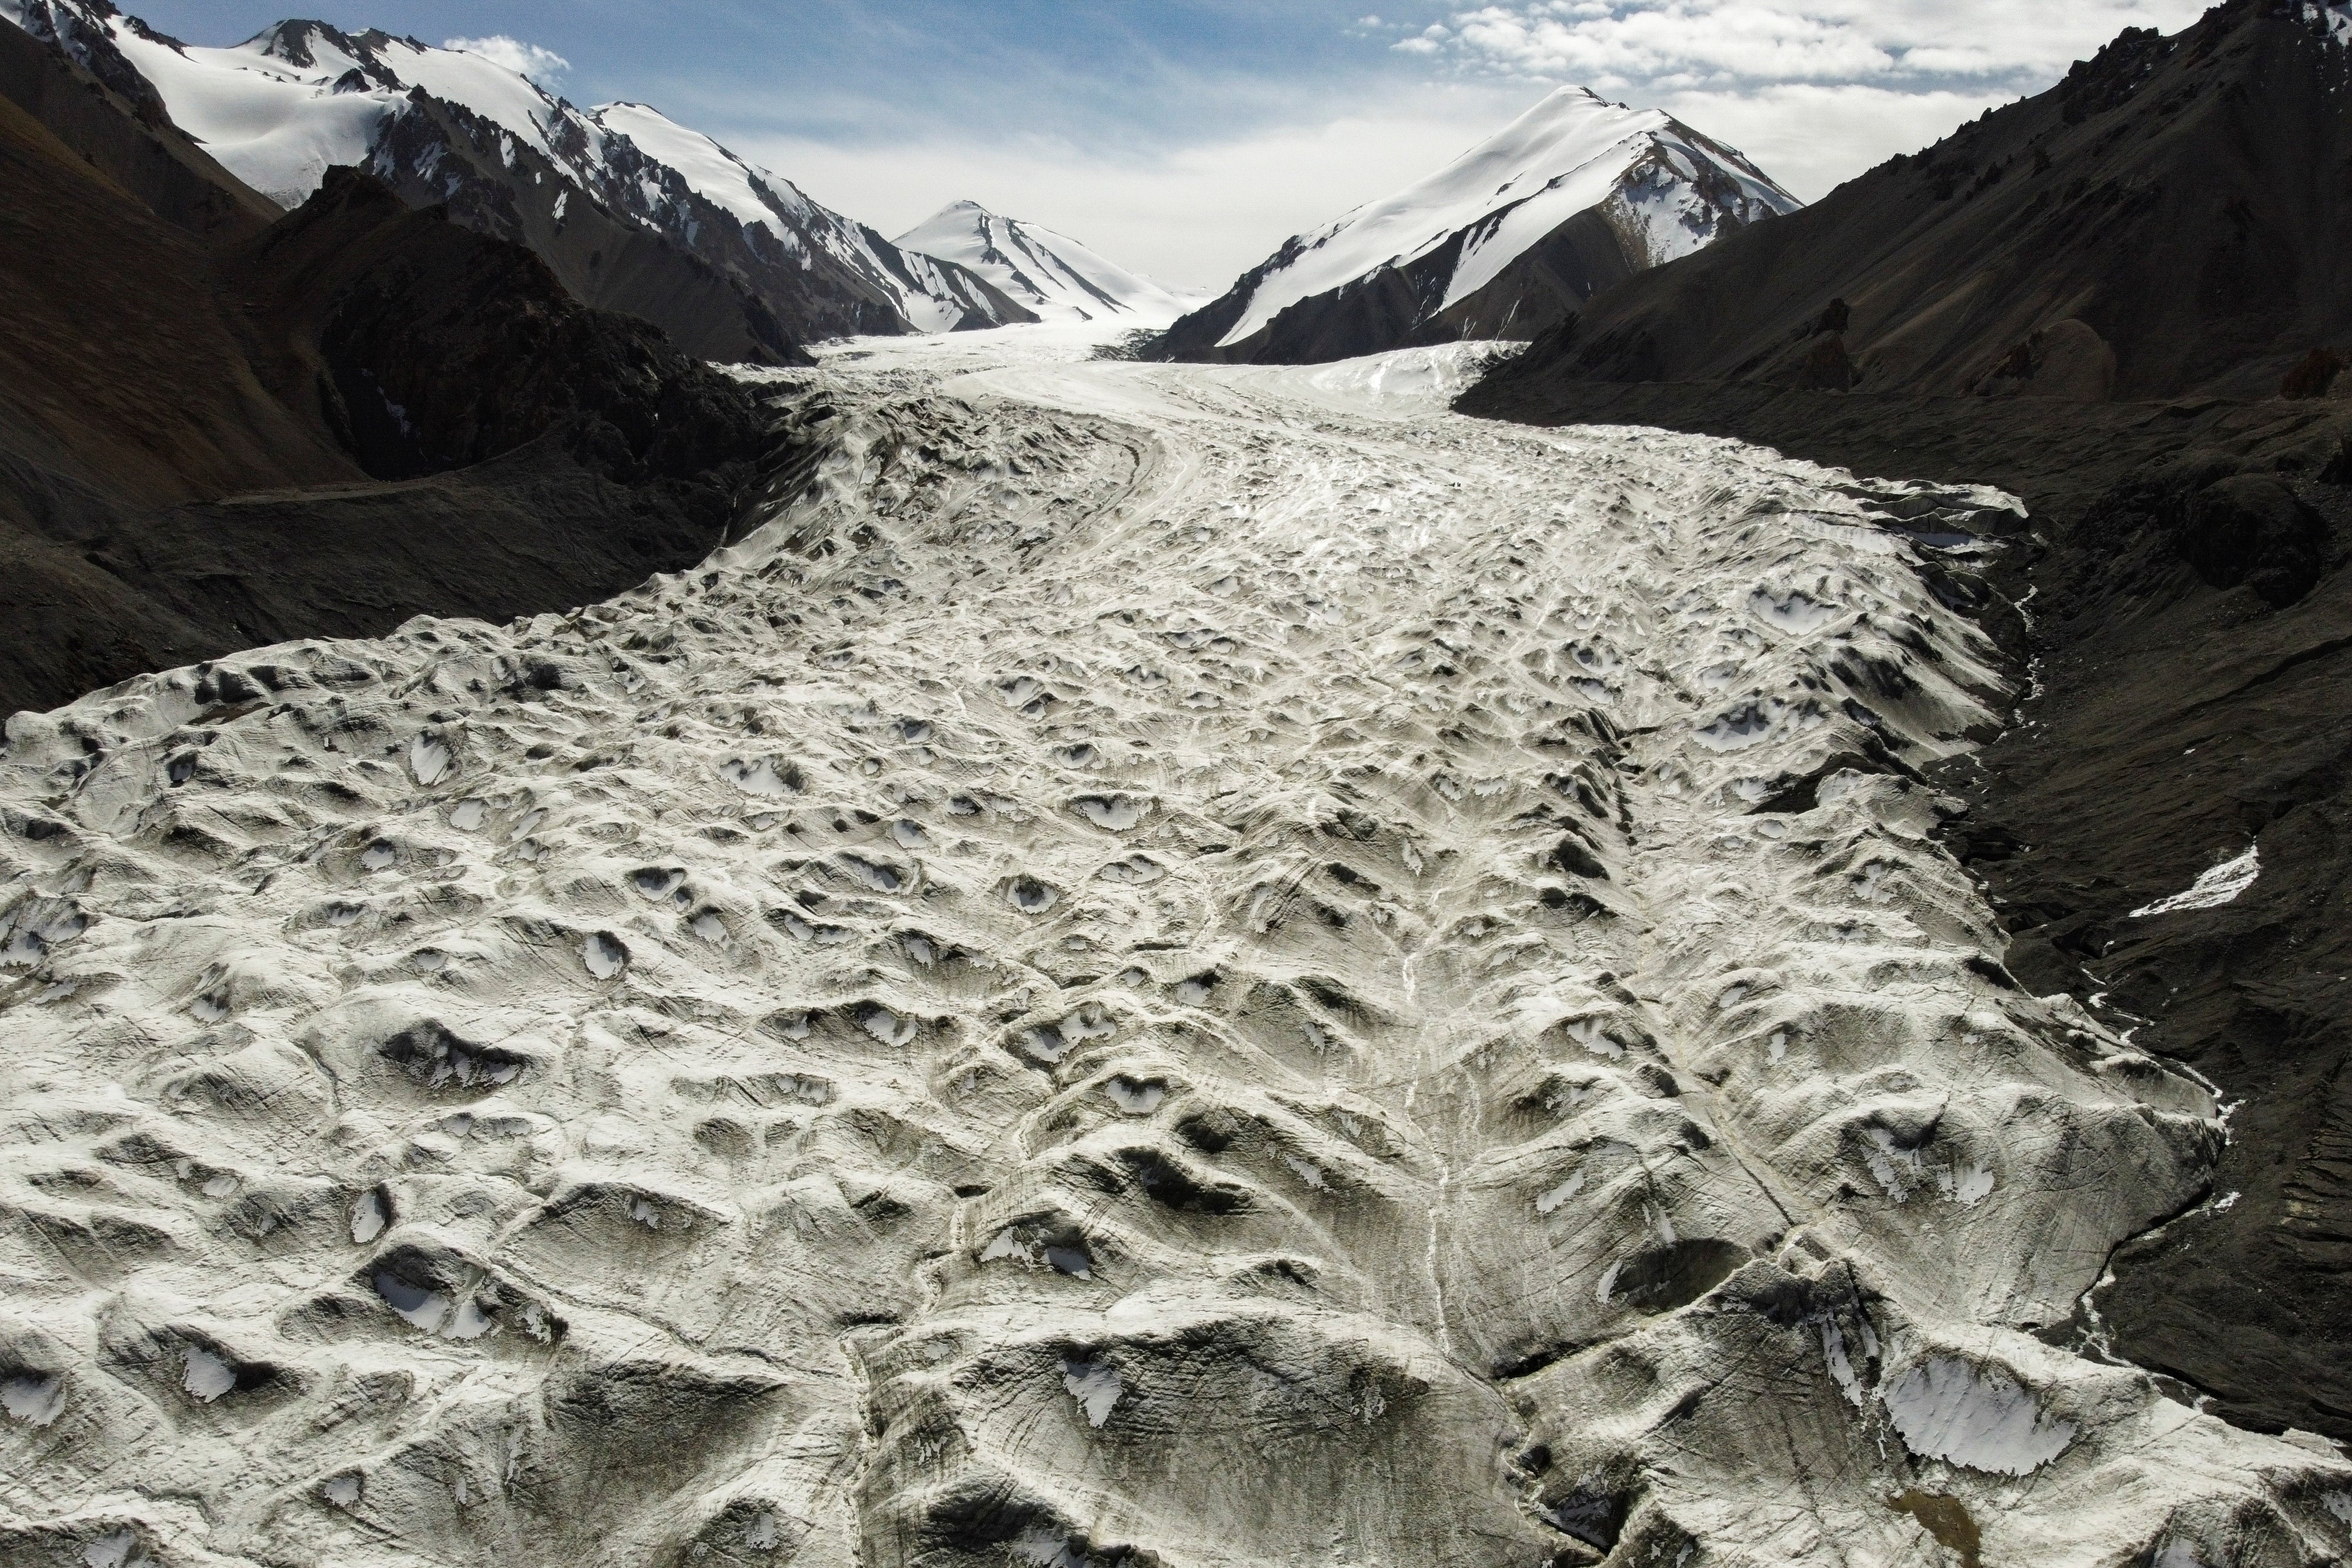 Climate crisis: Remote glaciers in China melting at ‘shocking’ pace, risking water shortages - The Independent